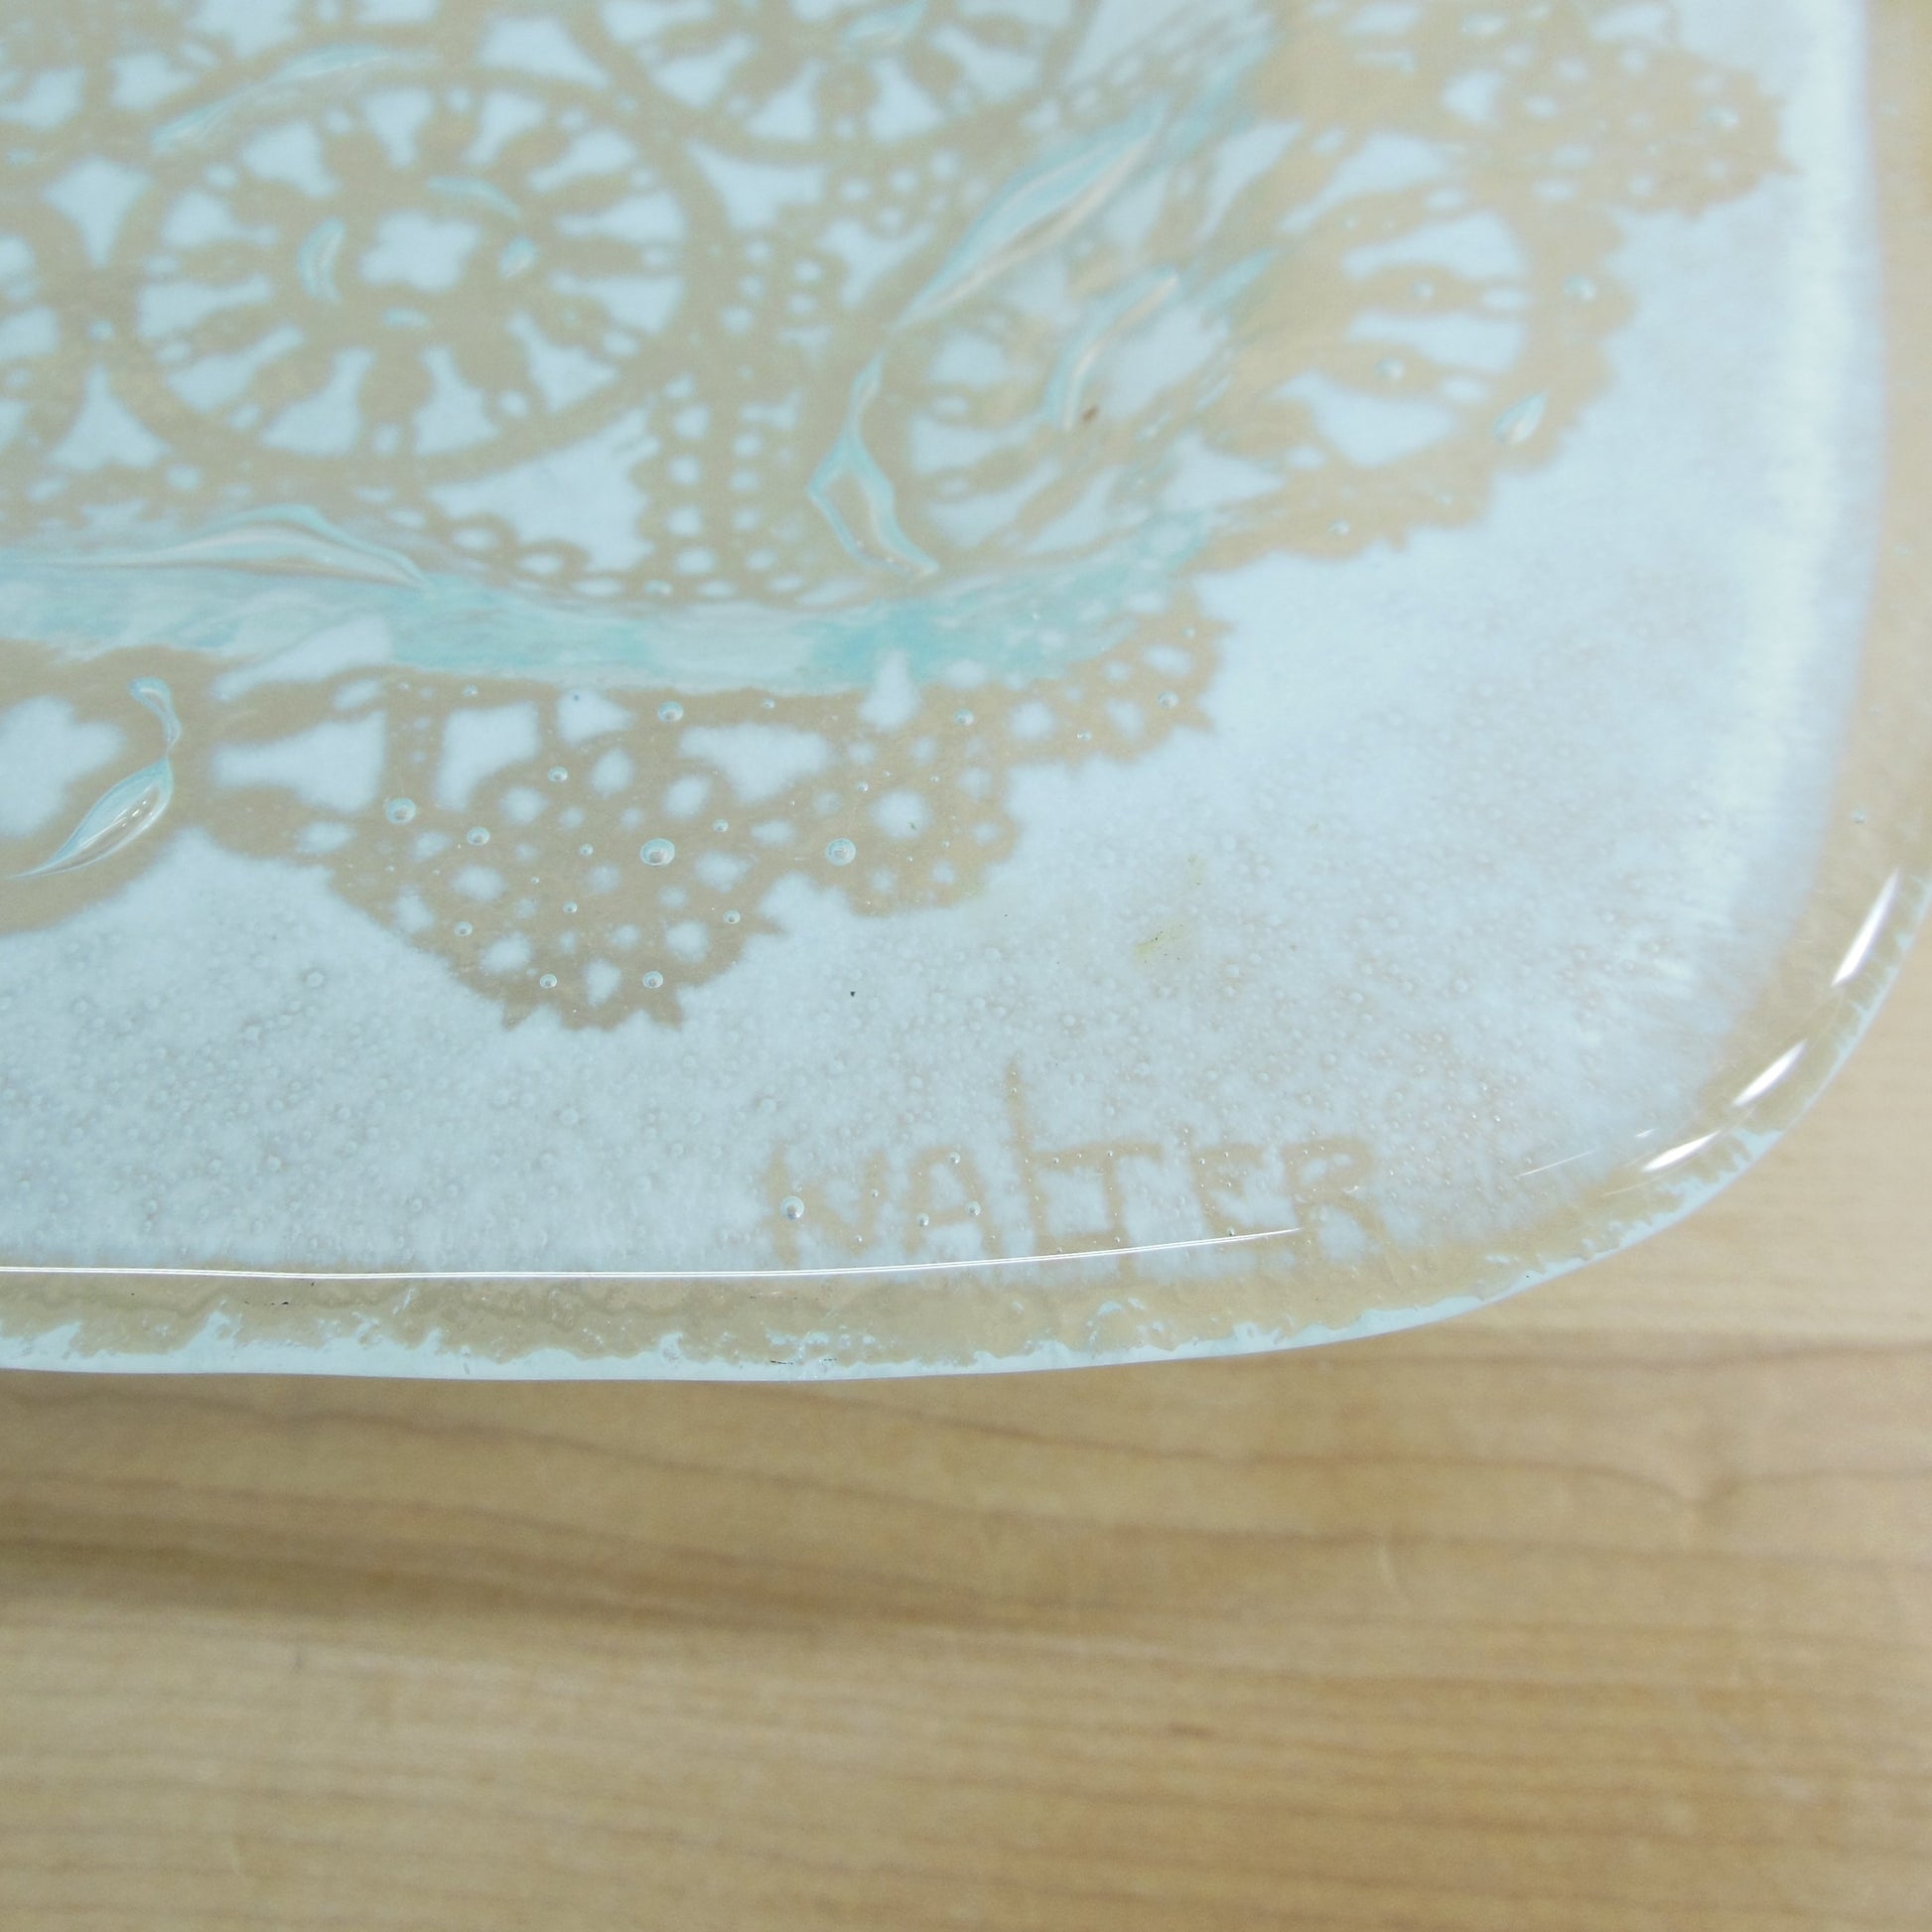 Edwin Walter Fused Glass Doily 10" Serving Tray Plate Signed